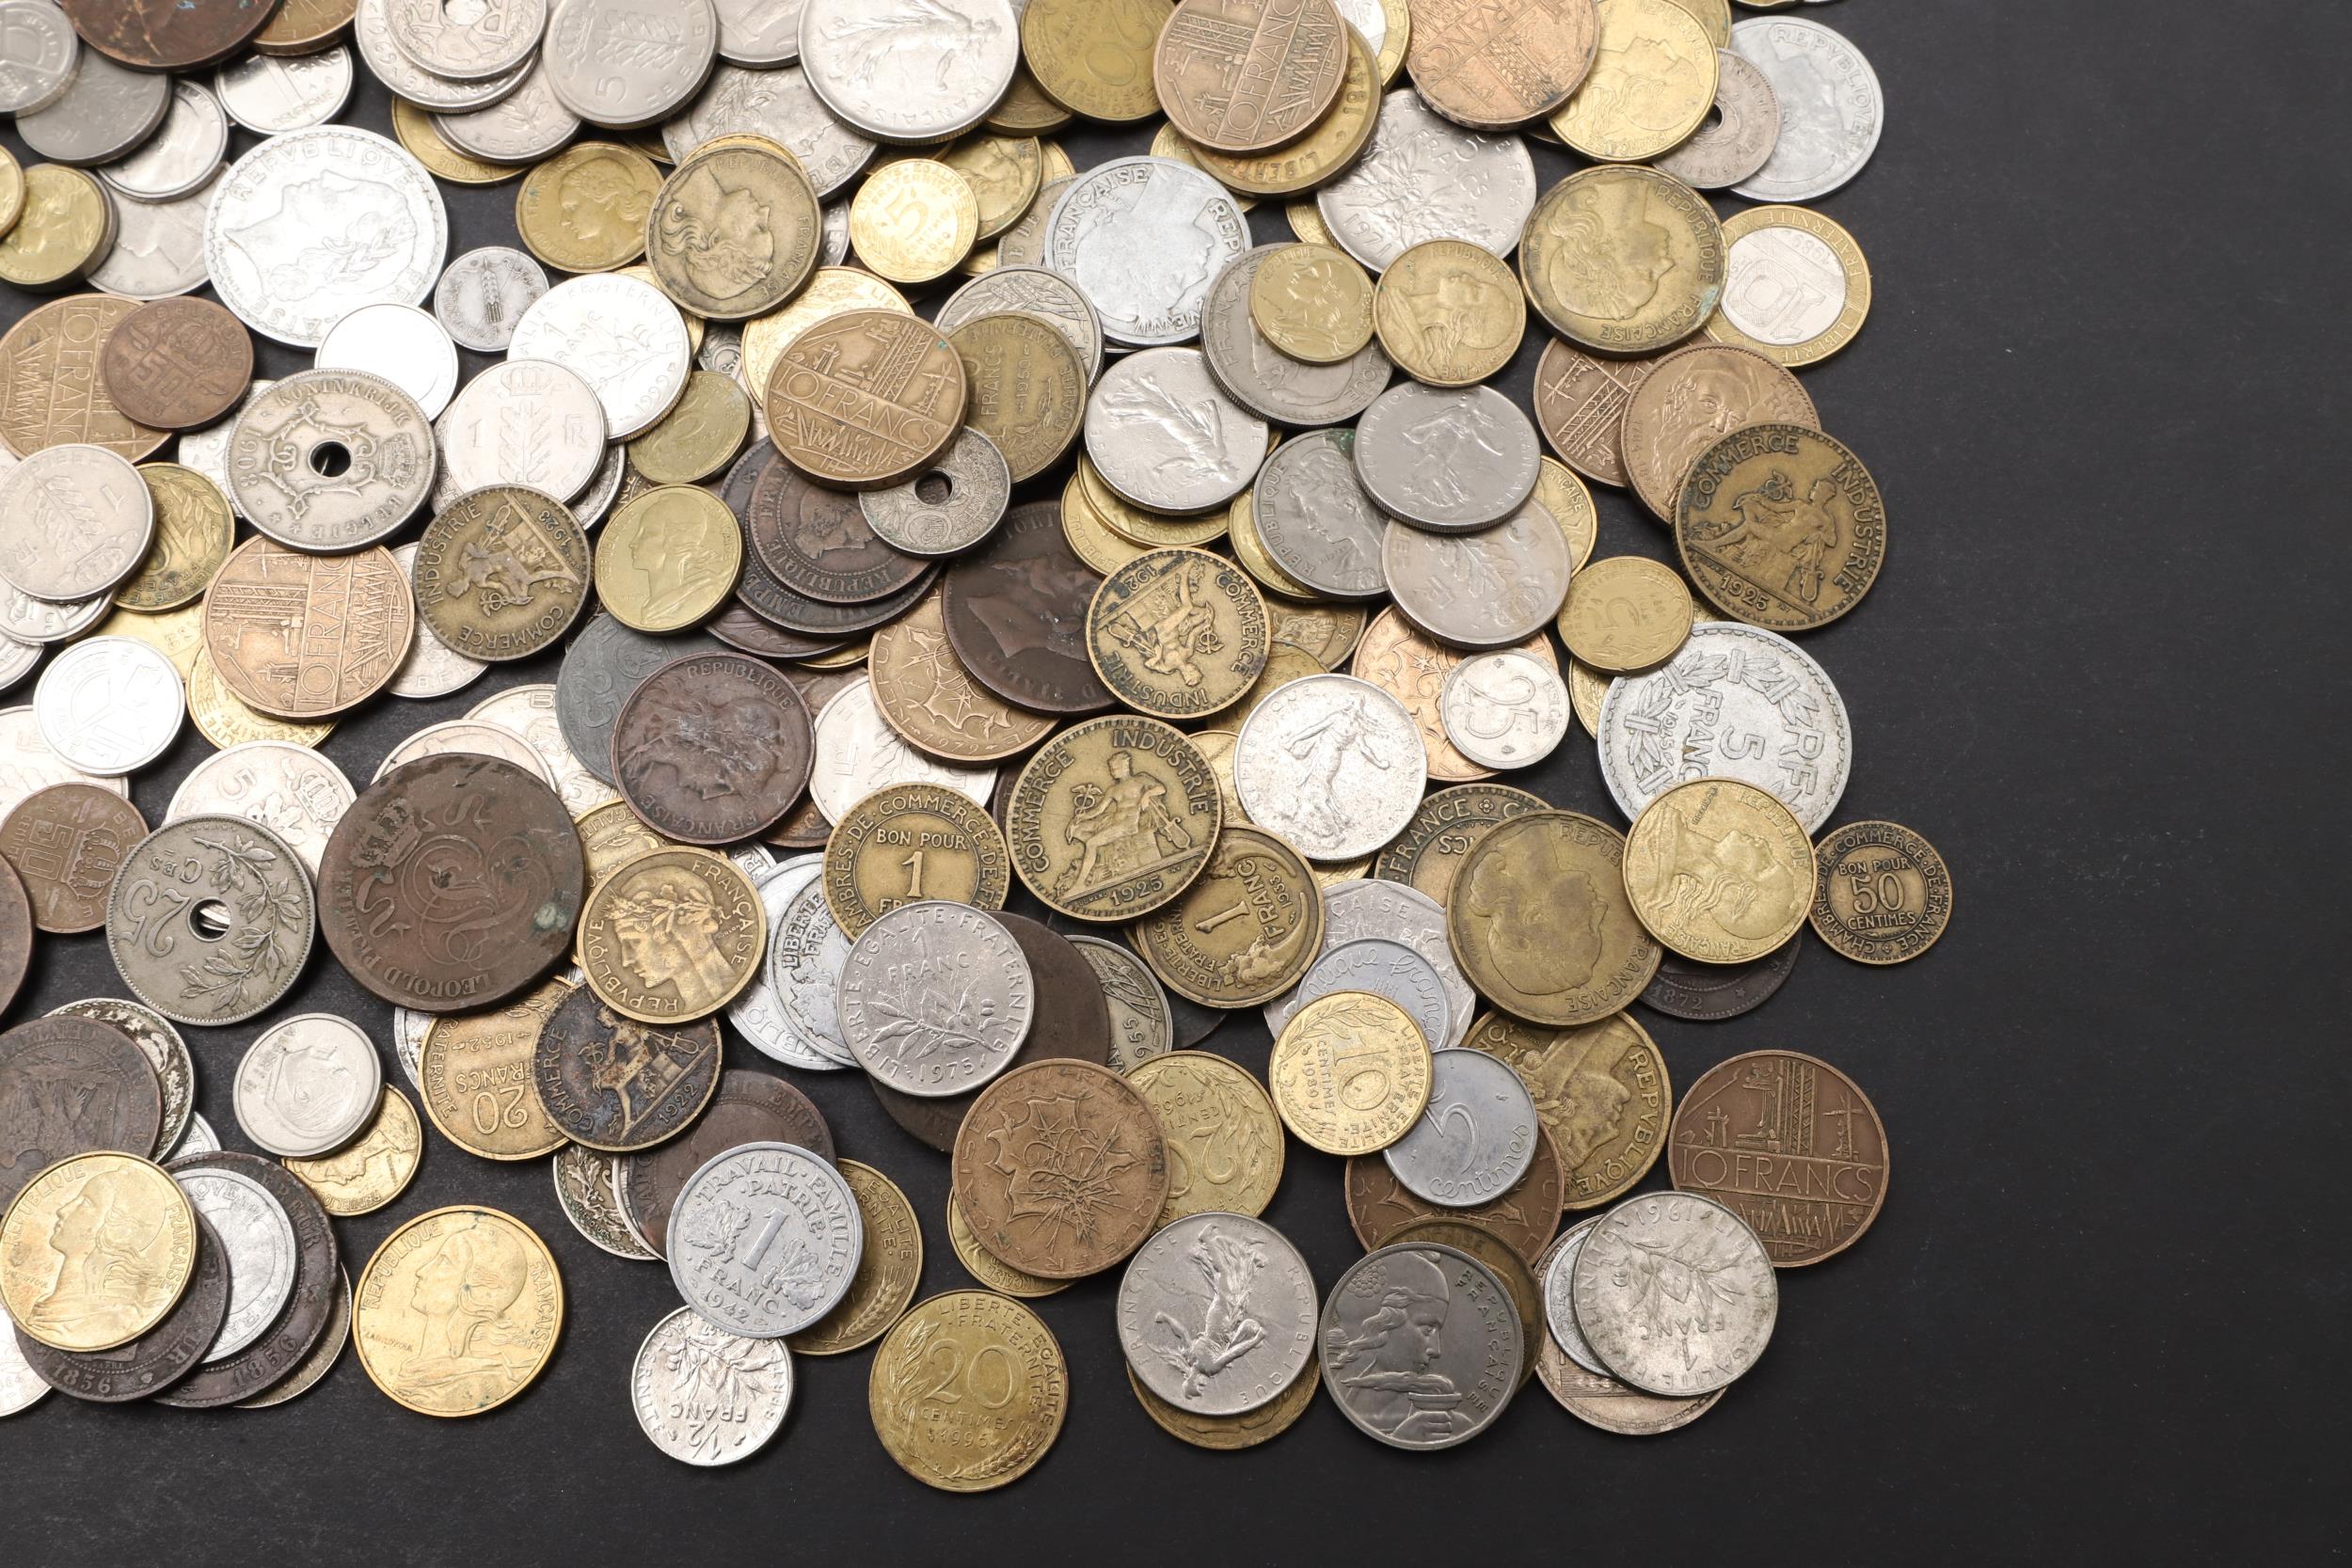 A COLLECTION OF 19TH AND 20TH CENTURY FRENCH AND BELGIAN COINS. - Image 10 of 10